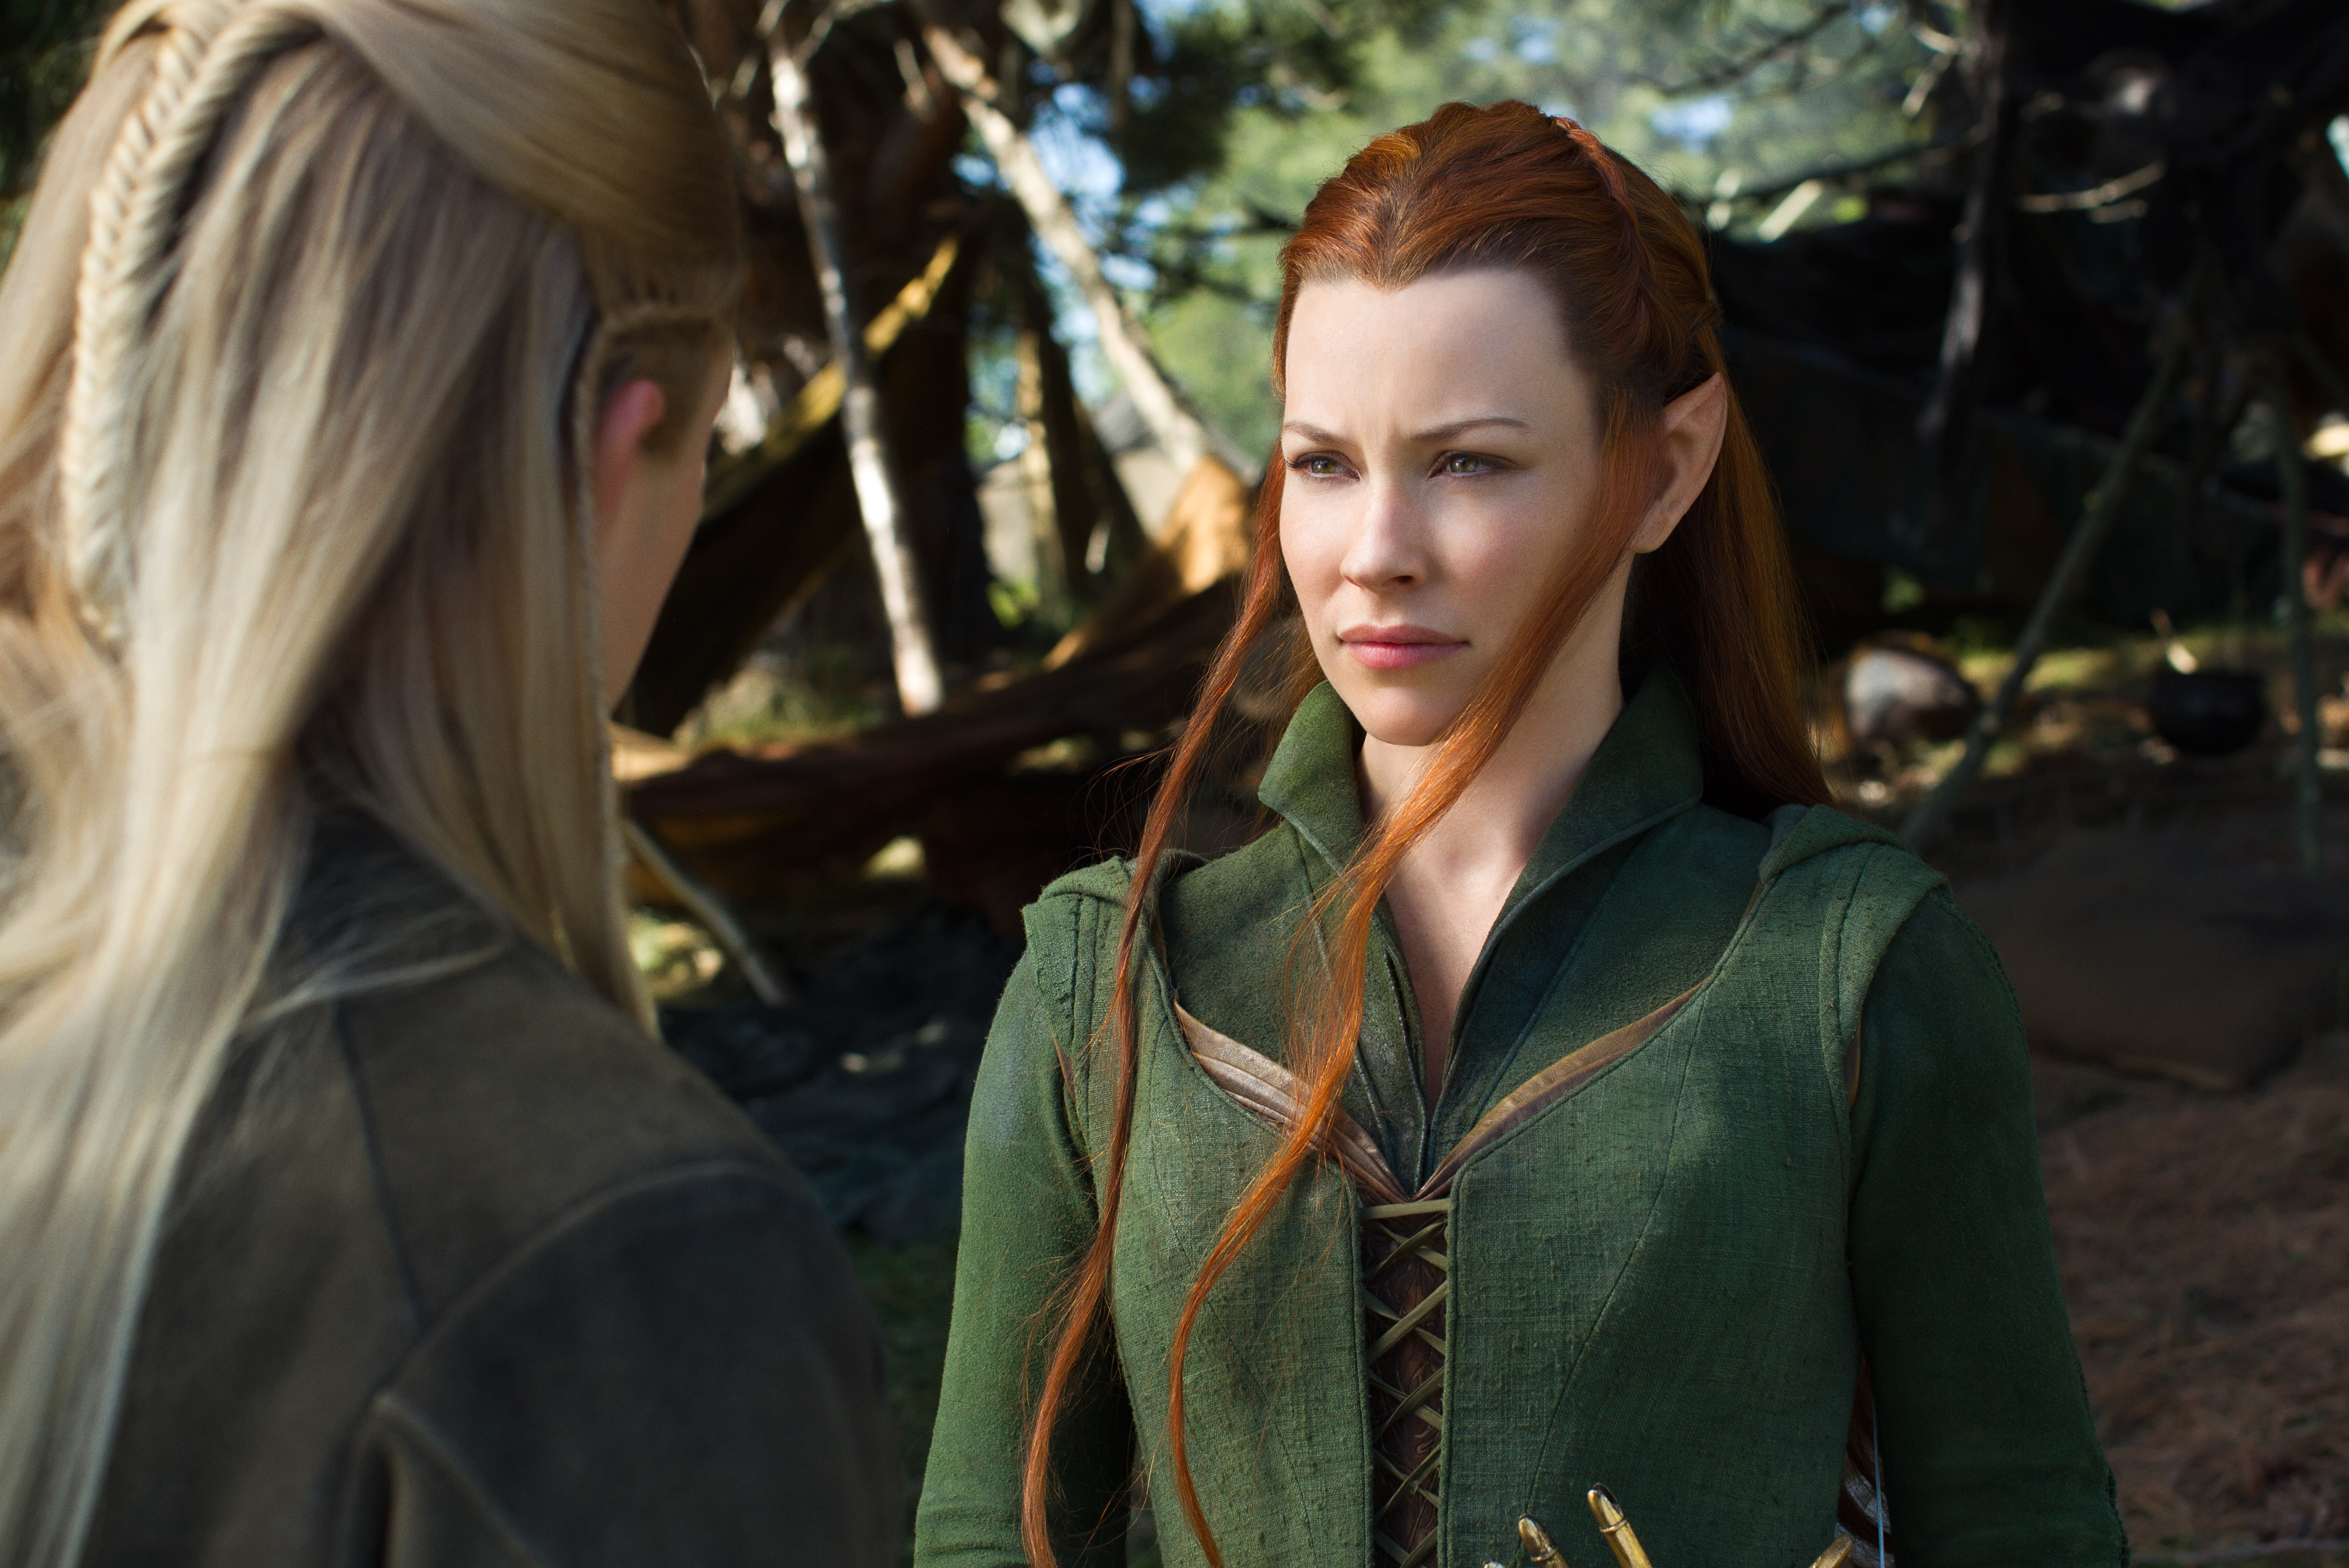 People 4762x3179 women redhead blonde Tauriel Evangeline Lilly Legolas The Hobbit: An Unexpected Journey The Hobbit movies actor actress Orlando Bloom